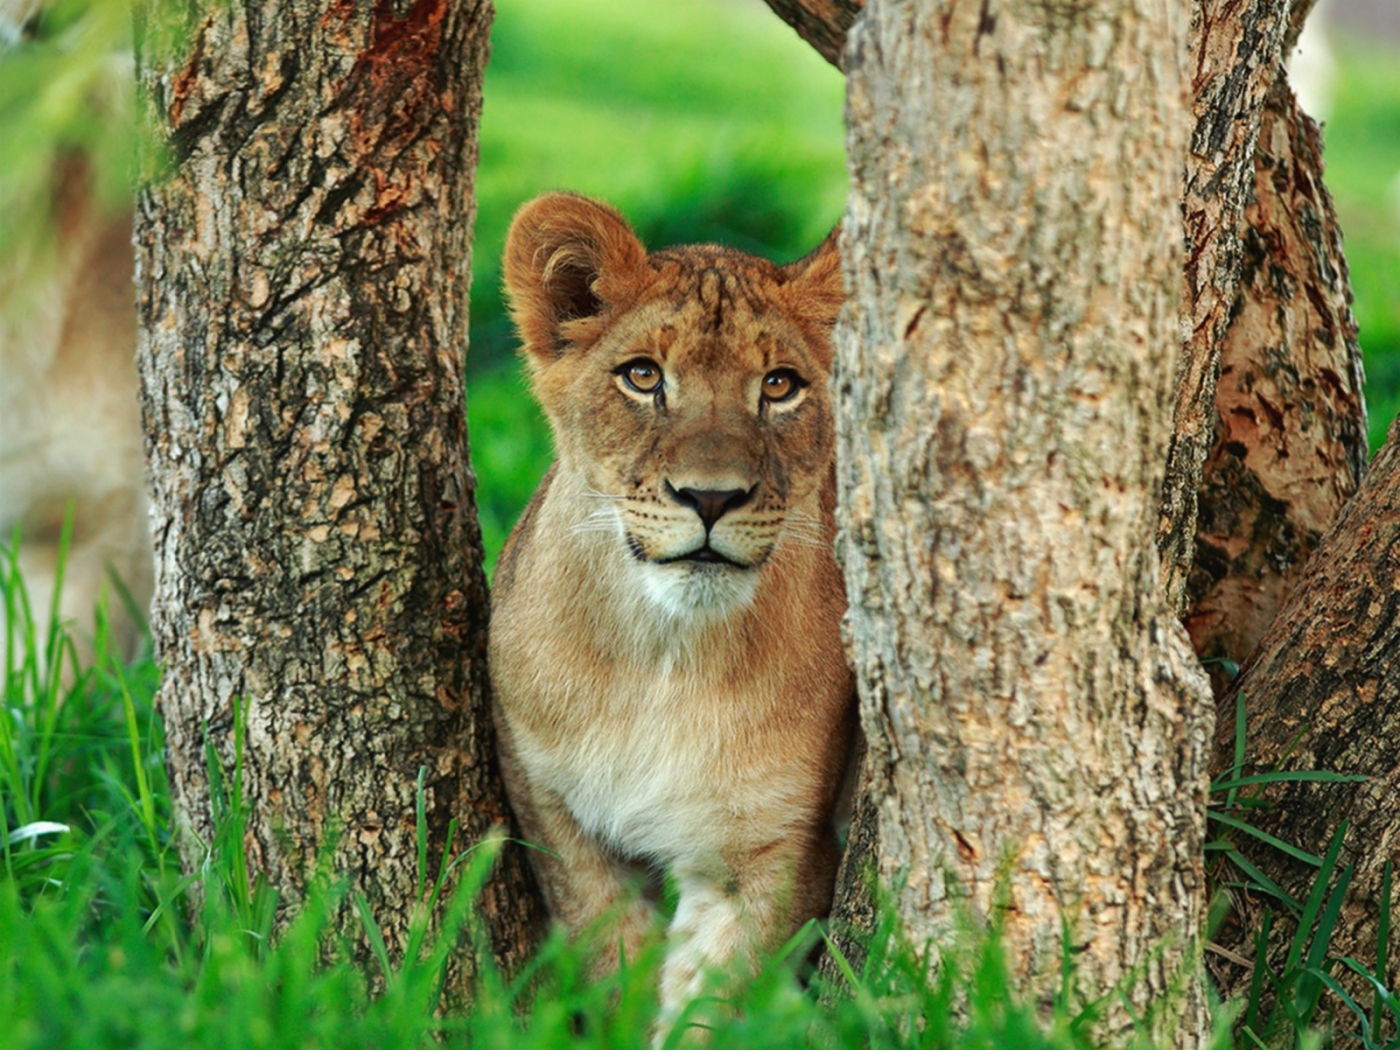 New Lock Screen Wallpapers animals, lions